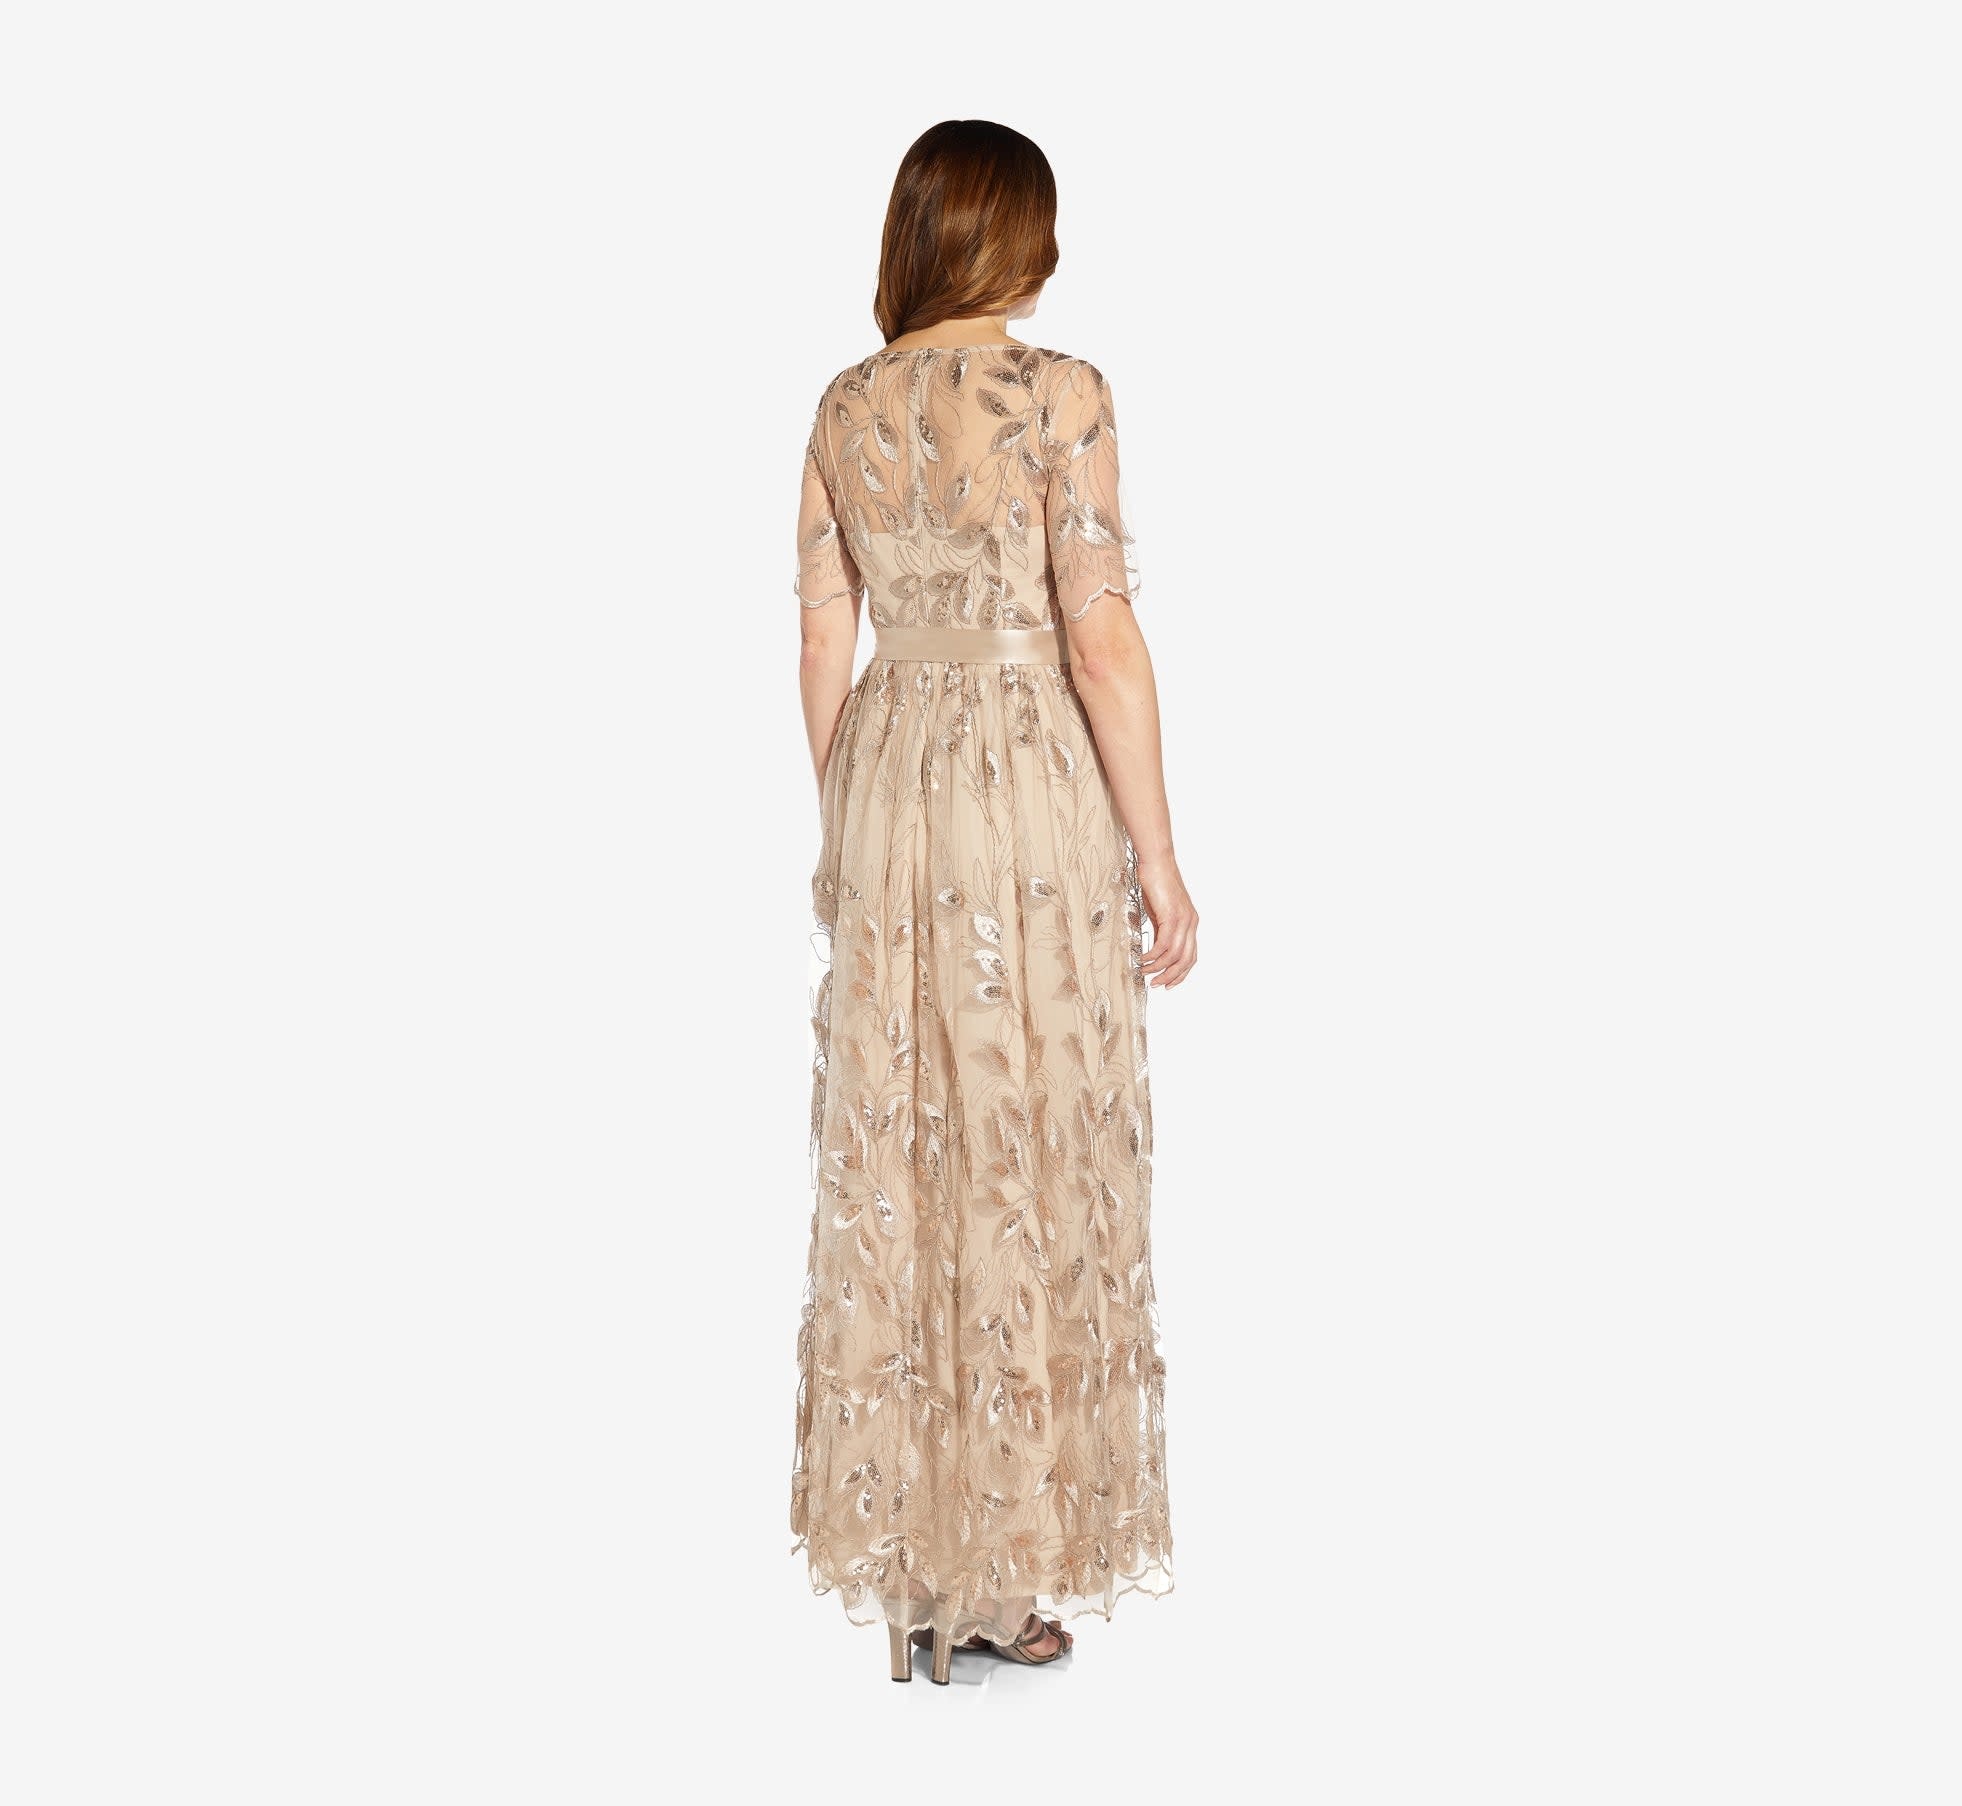 ADRIANNA PAPELL ADRIANNA PAPELL EMBROIDERED LONG BALLGOWN